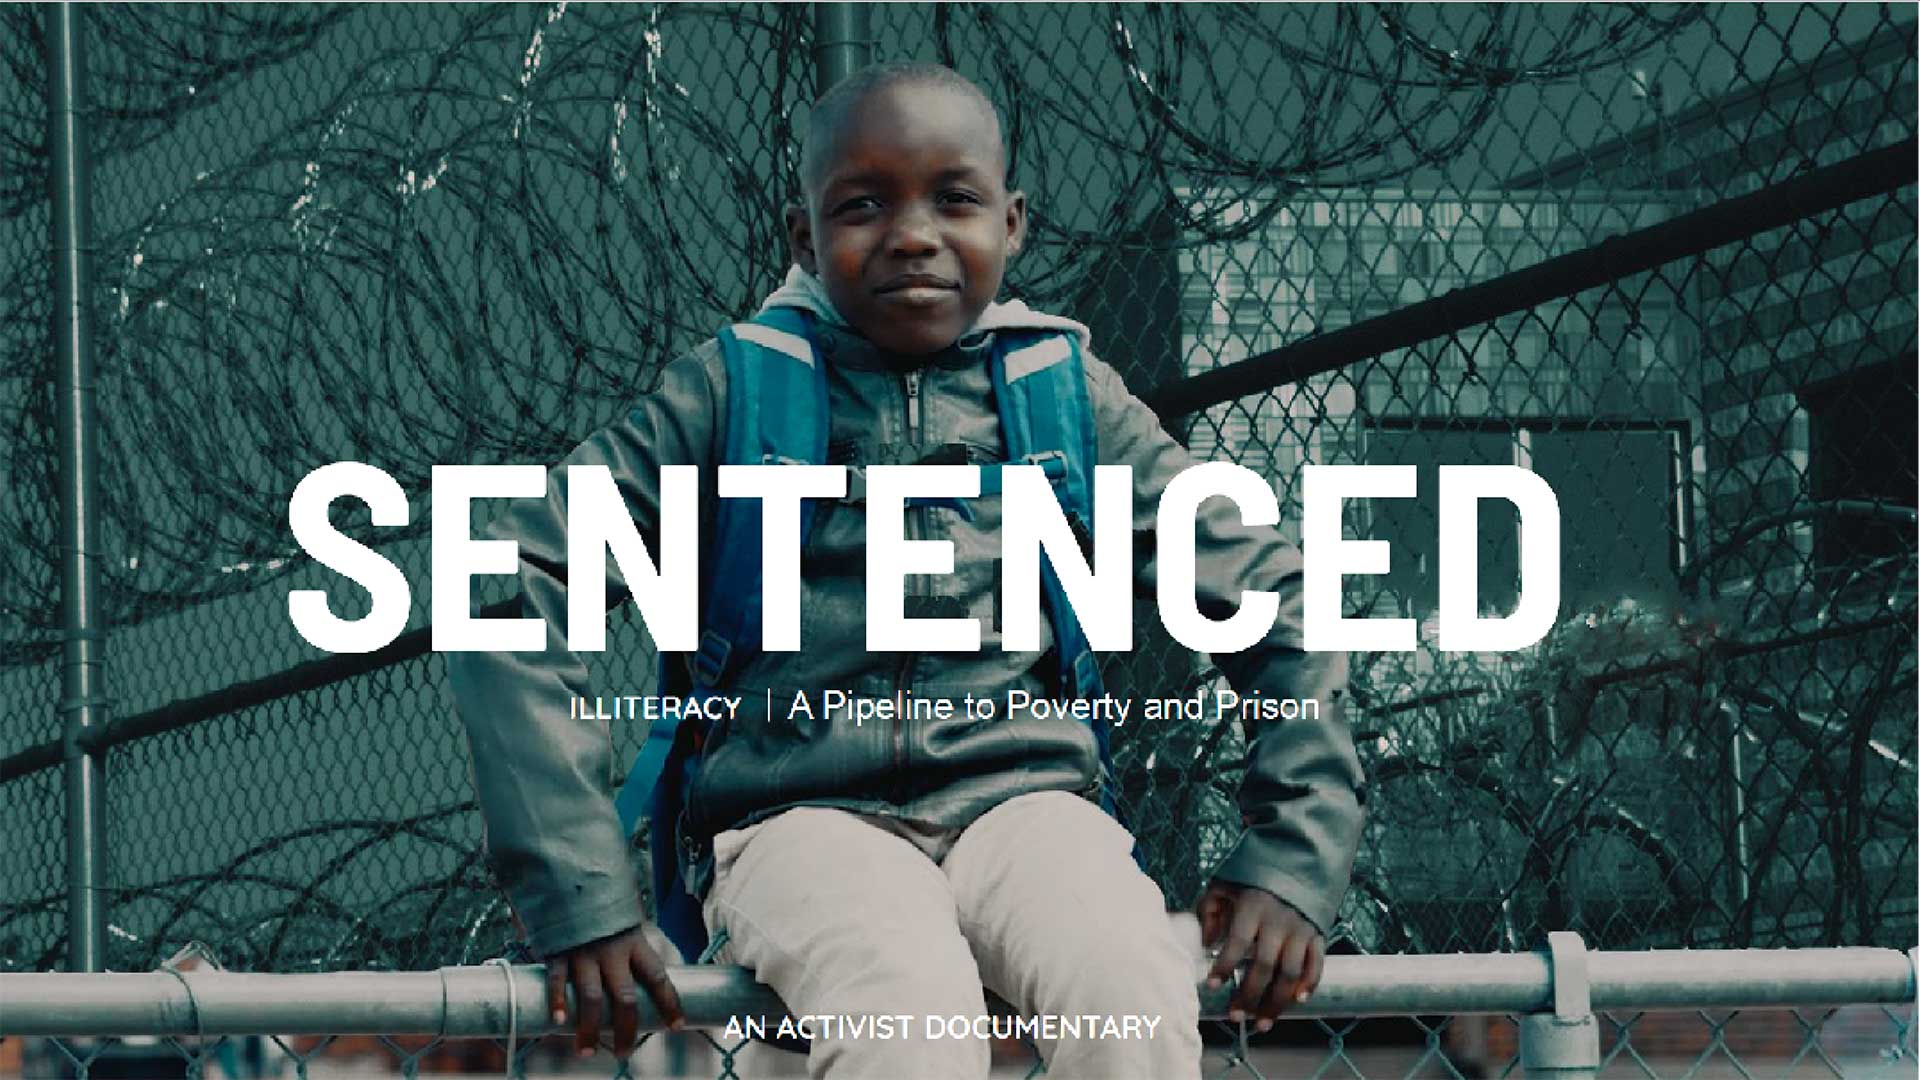 "Sentenced", a Feature Film by the Children's Literacy Project